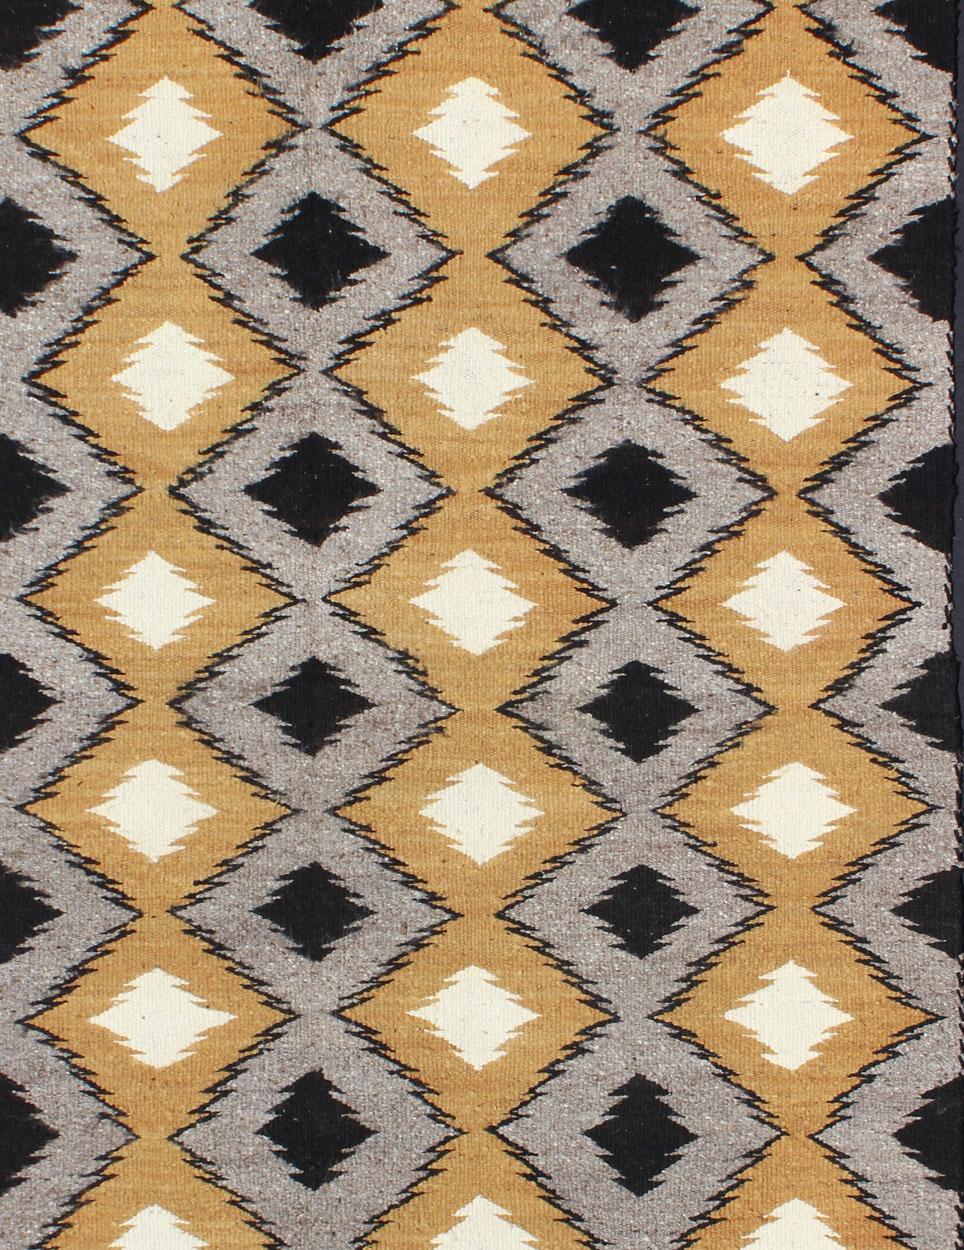 This intriguing antique Navajo Kilim, circa 1940 was woven in the United States during the first half of the 20th century. The exciting and unique composition boasts a captivating geometric composition with an all-over cross-shaped design. The range